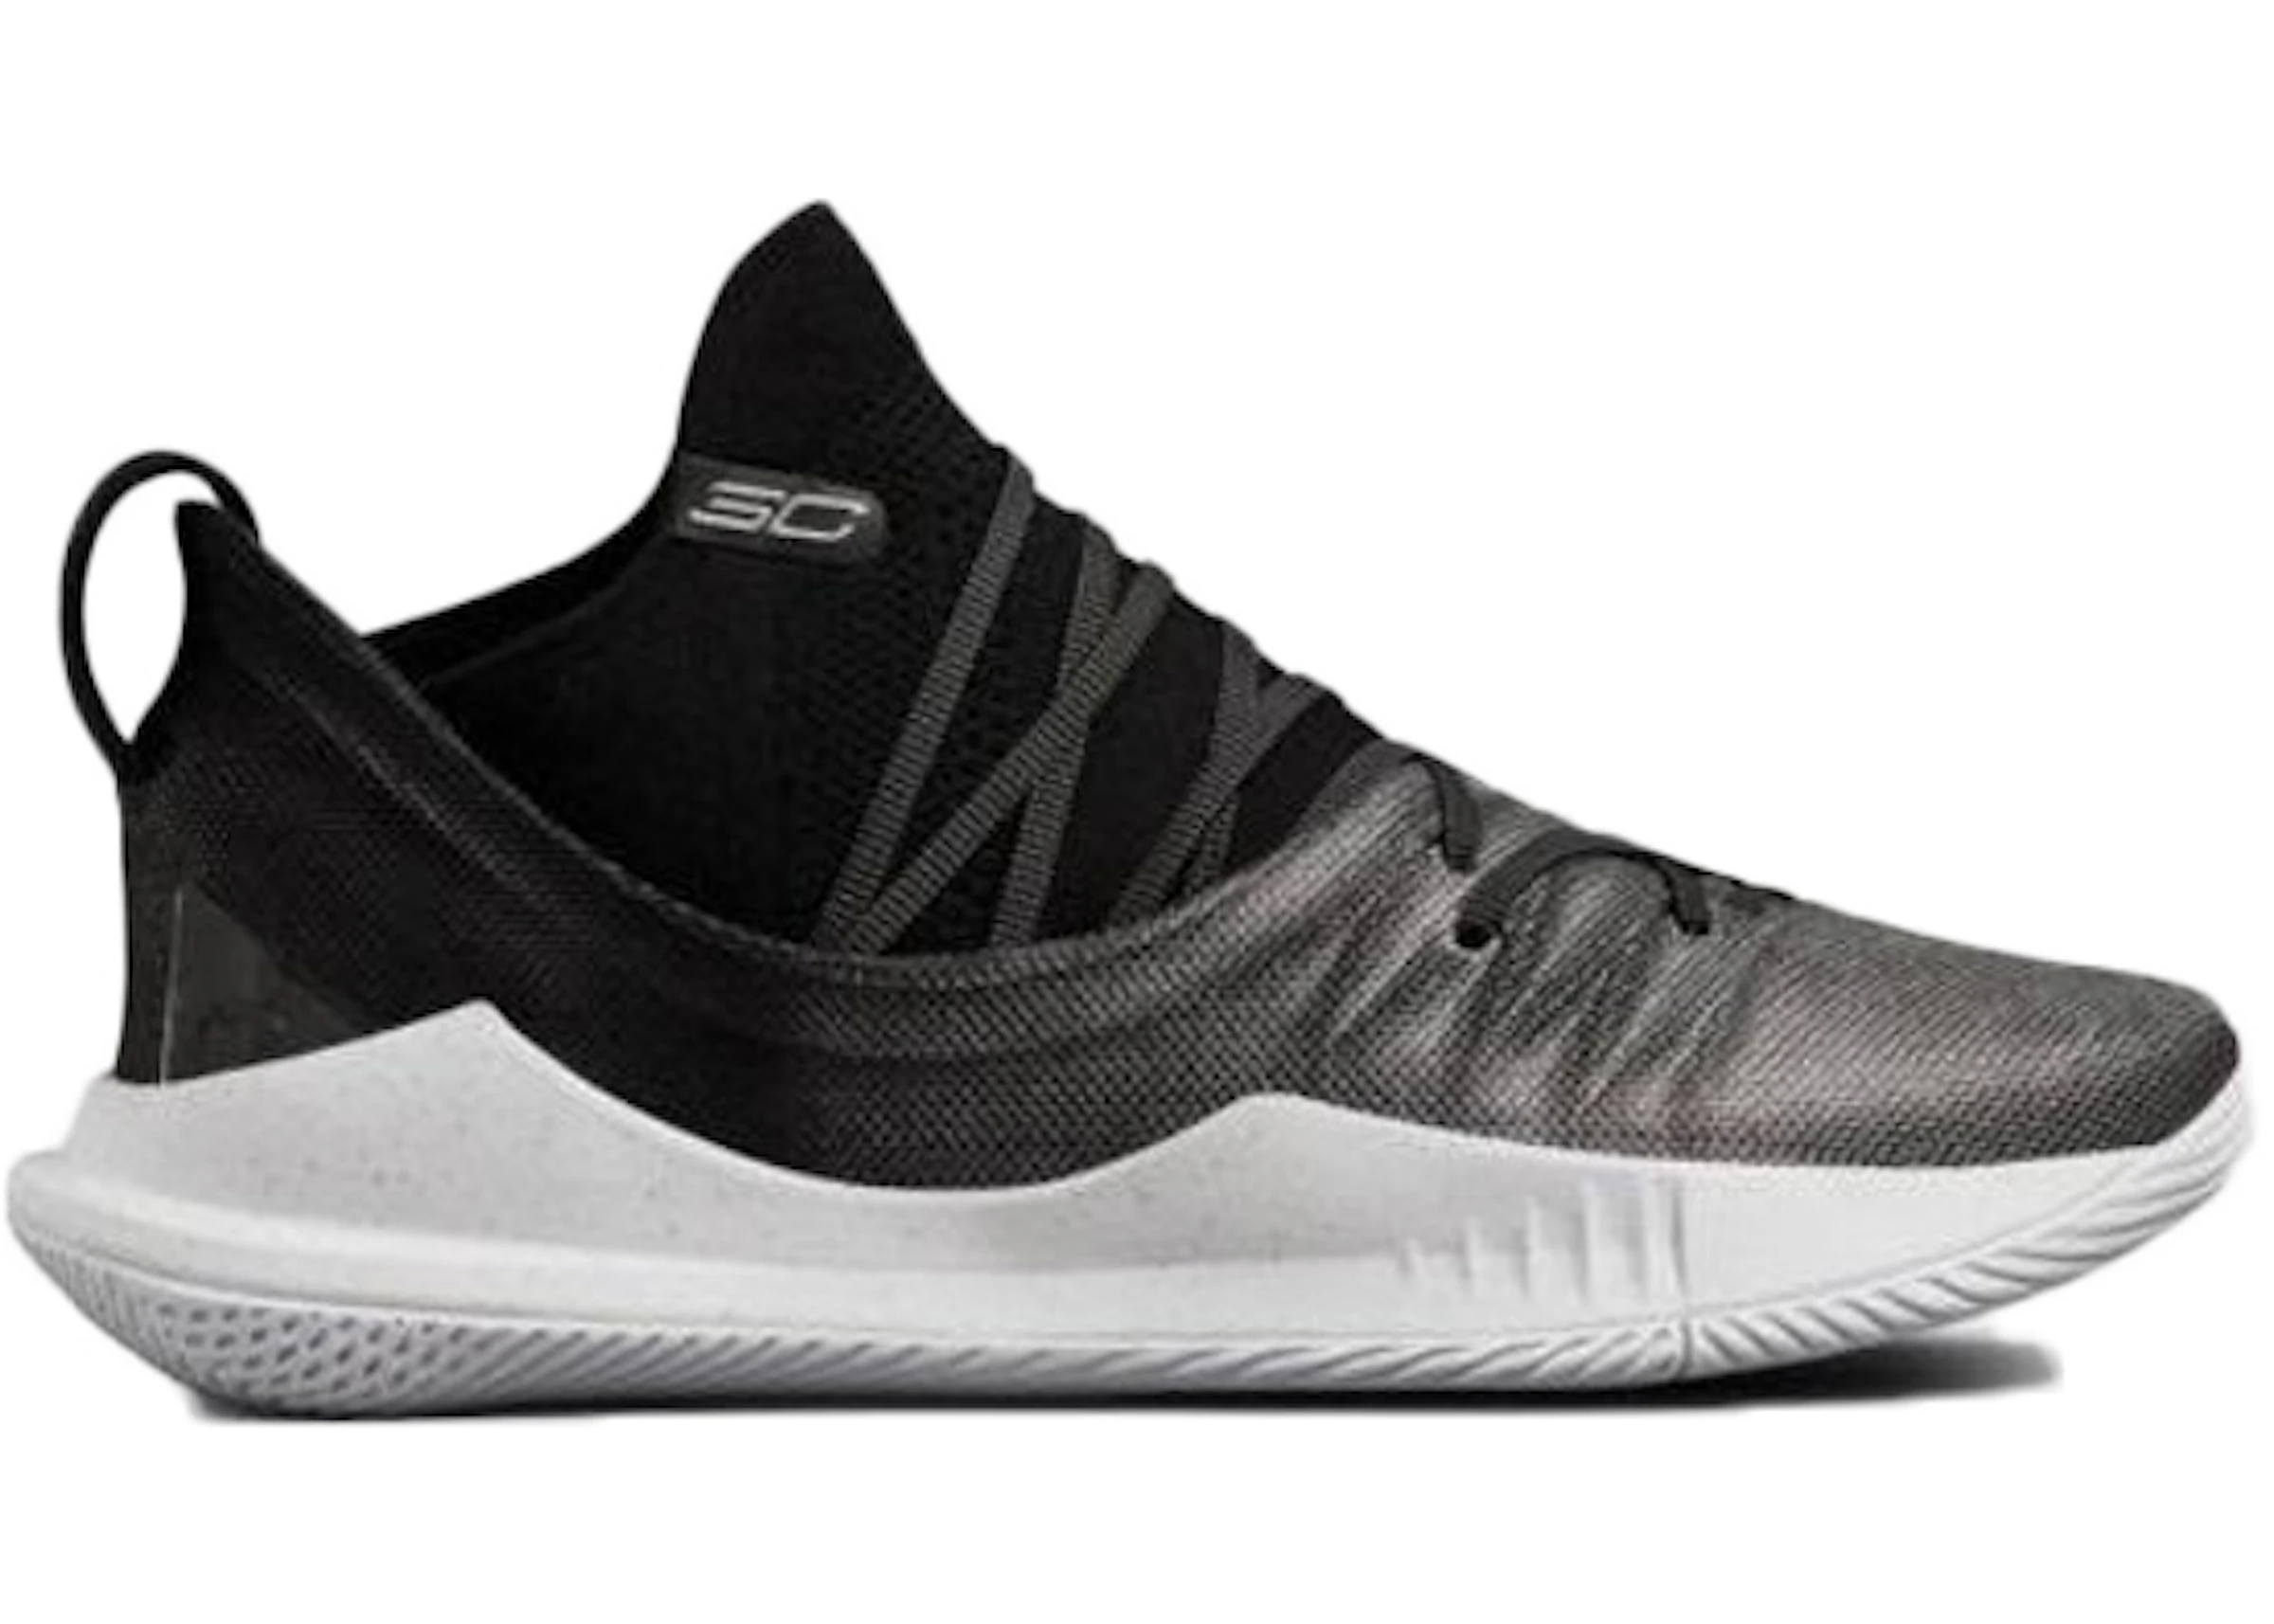 lazo mineral combustible Under Armour Curry 5 Black Silver - 3020657-101 - ES